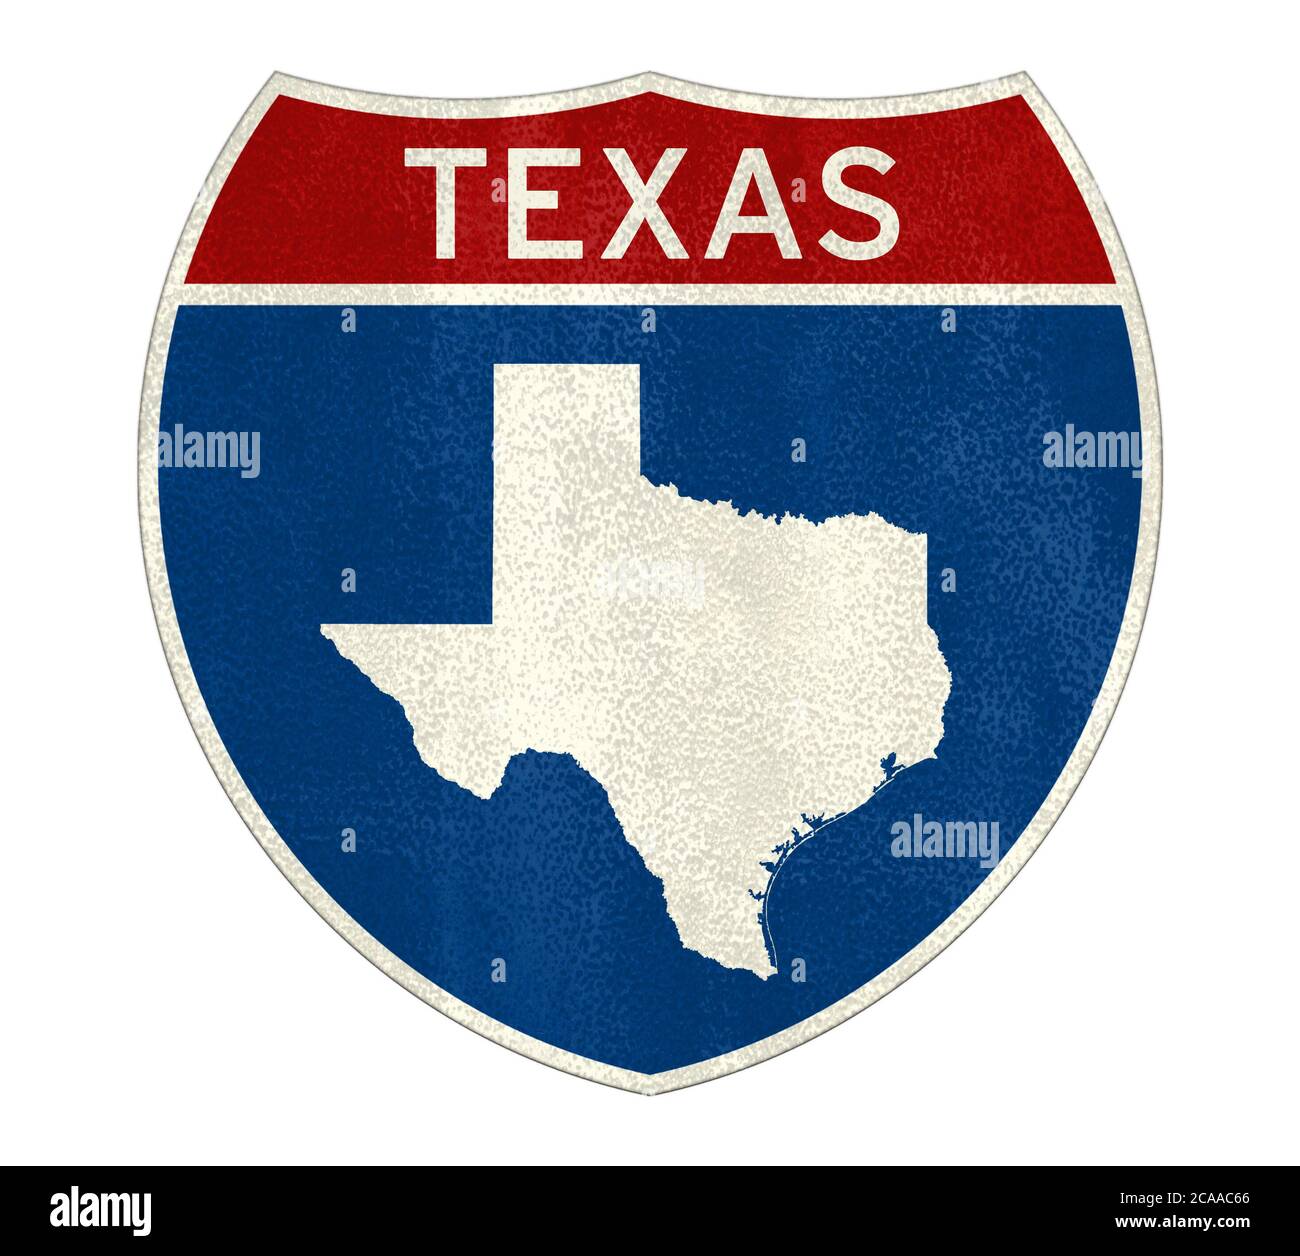 Texas Interstate road sign map Stock Photo